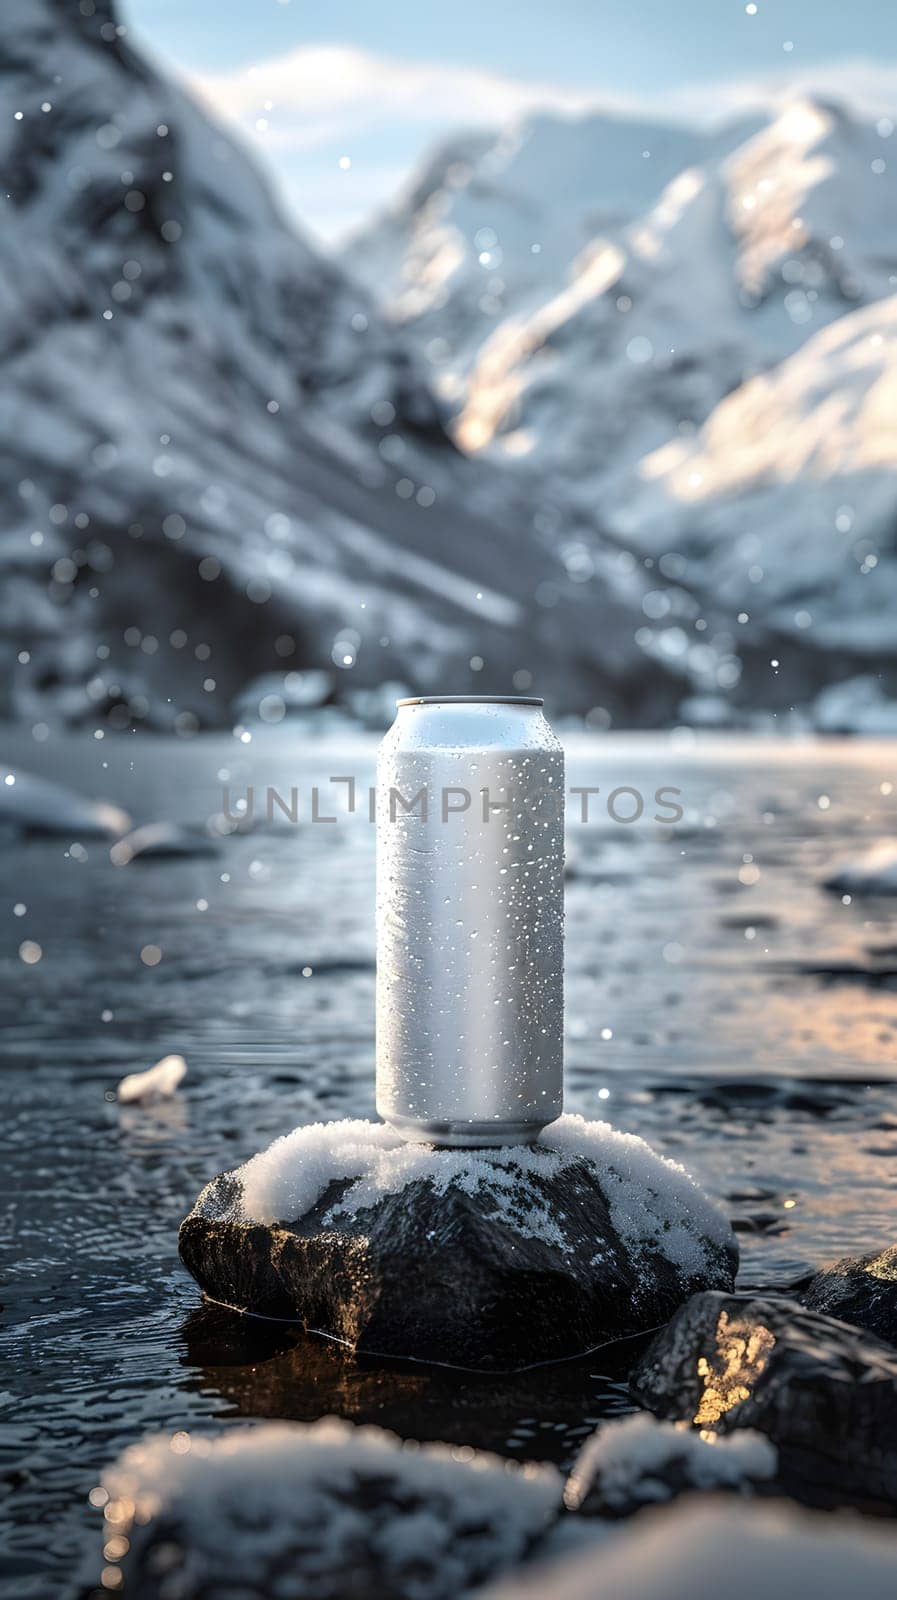 A can of soda rests on a rock in the middle of a river, surrounded by the natural landscape of mountains and rocks, with water flowing around it